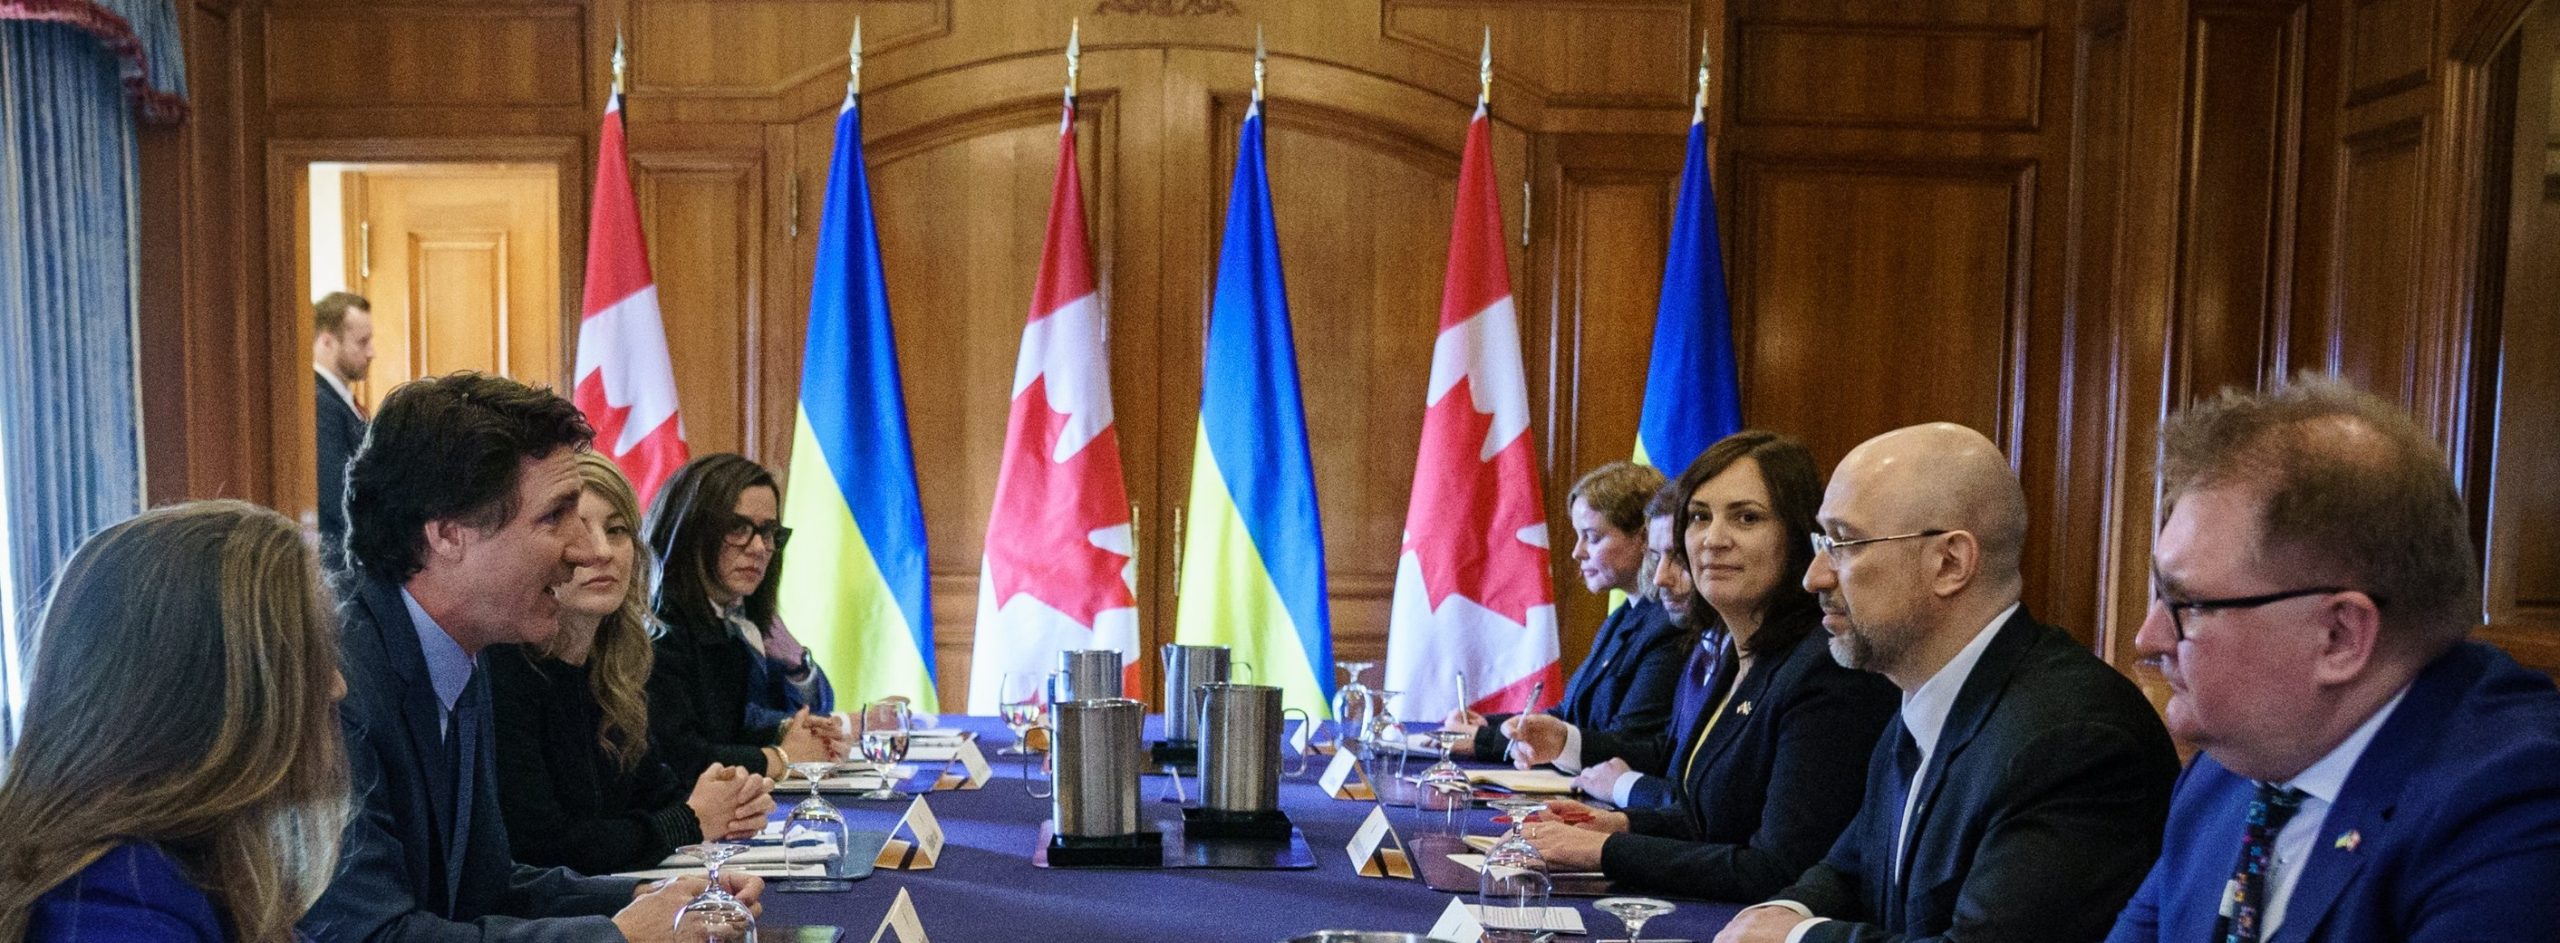 Canada announces new military aid for Ukraine, sanctions Russian individuals, entities